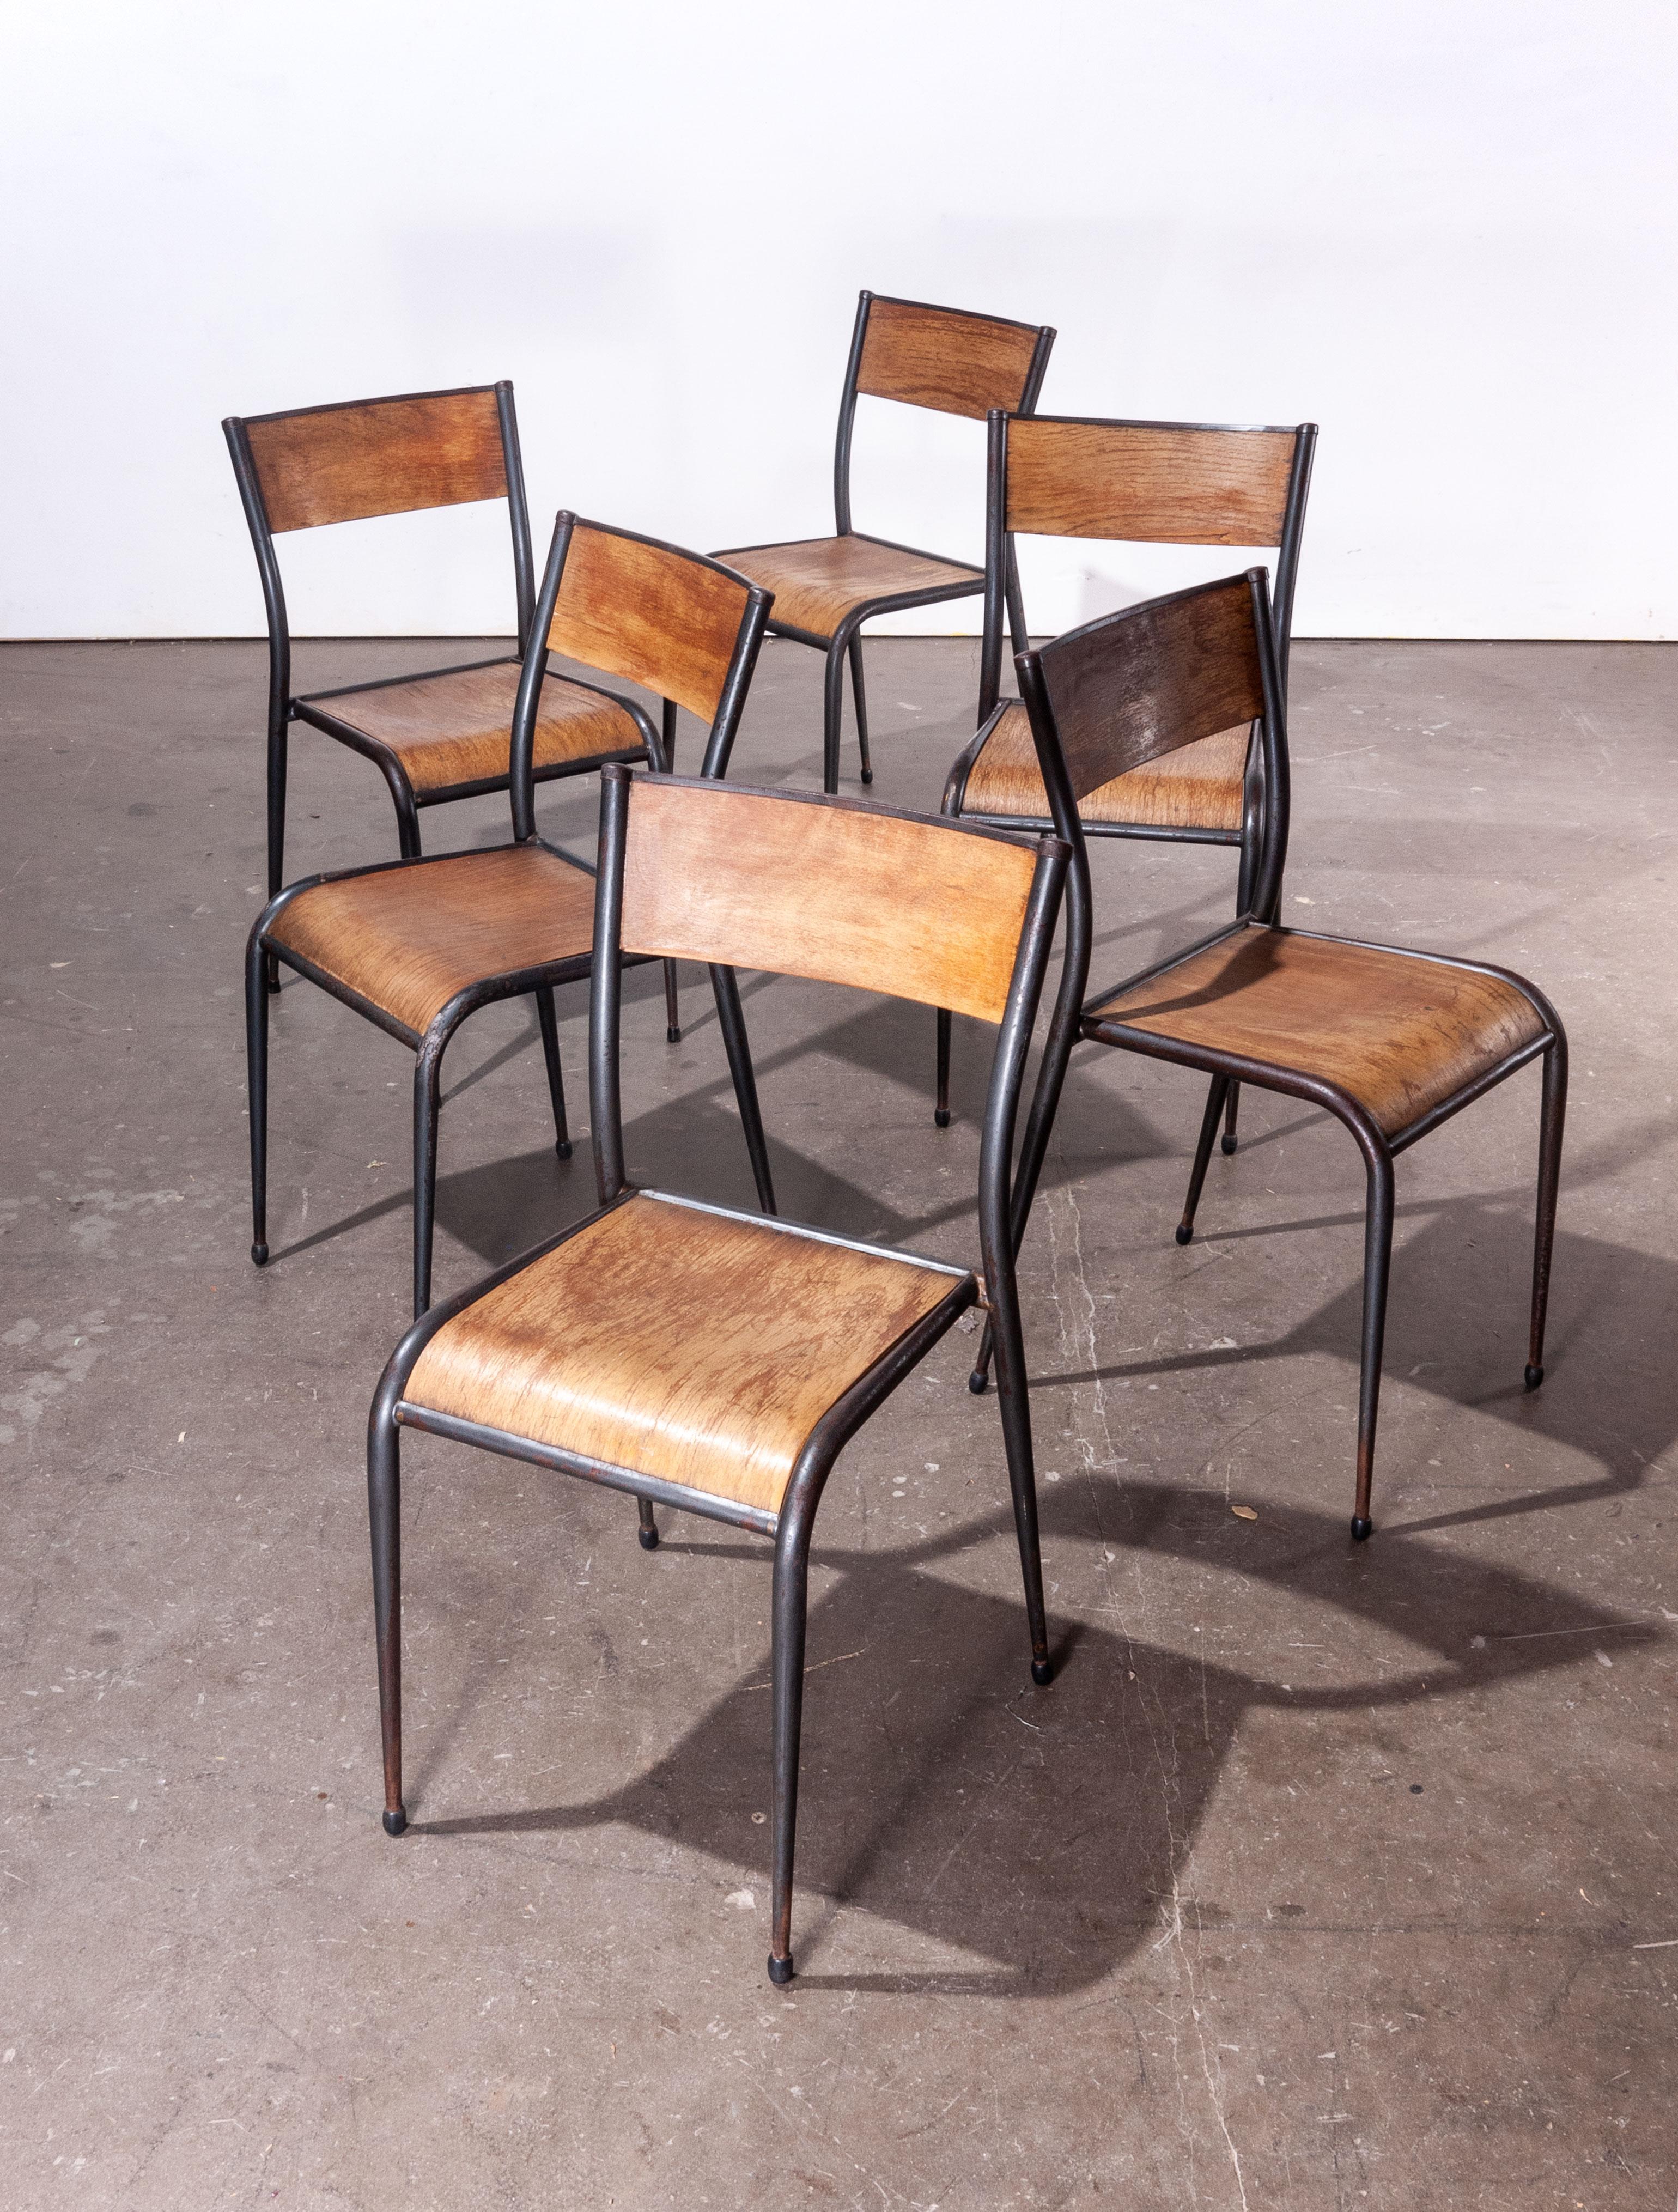 1950s French Mullca tapered leg dining chairs, set of six, other quantities available
Set of six rare tapered leg 1950s French Mullca vintage stacking school/dining chairs. One of our most favourite chairs, in 1947 Robert Muller and Gaston